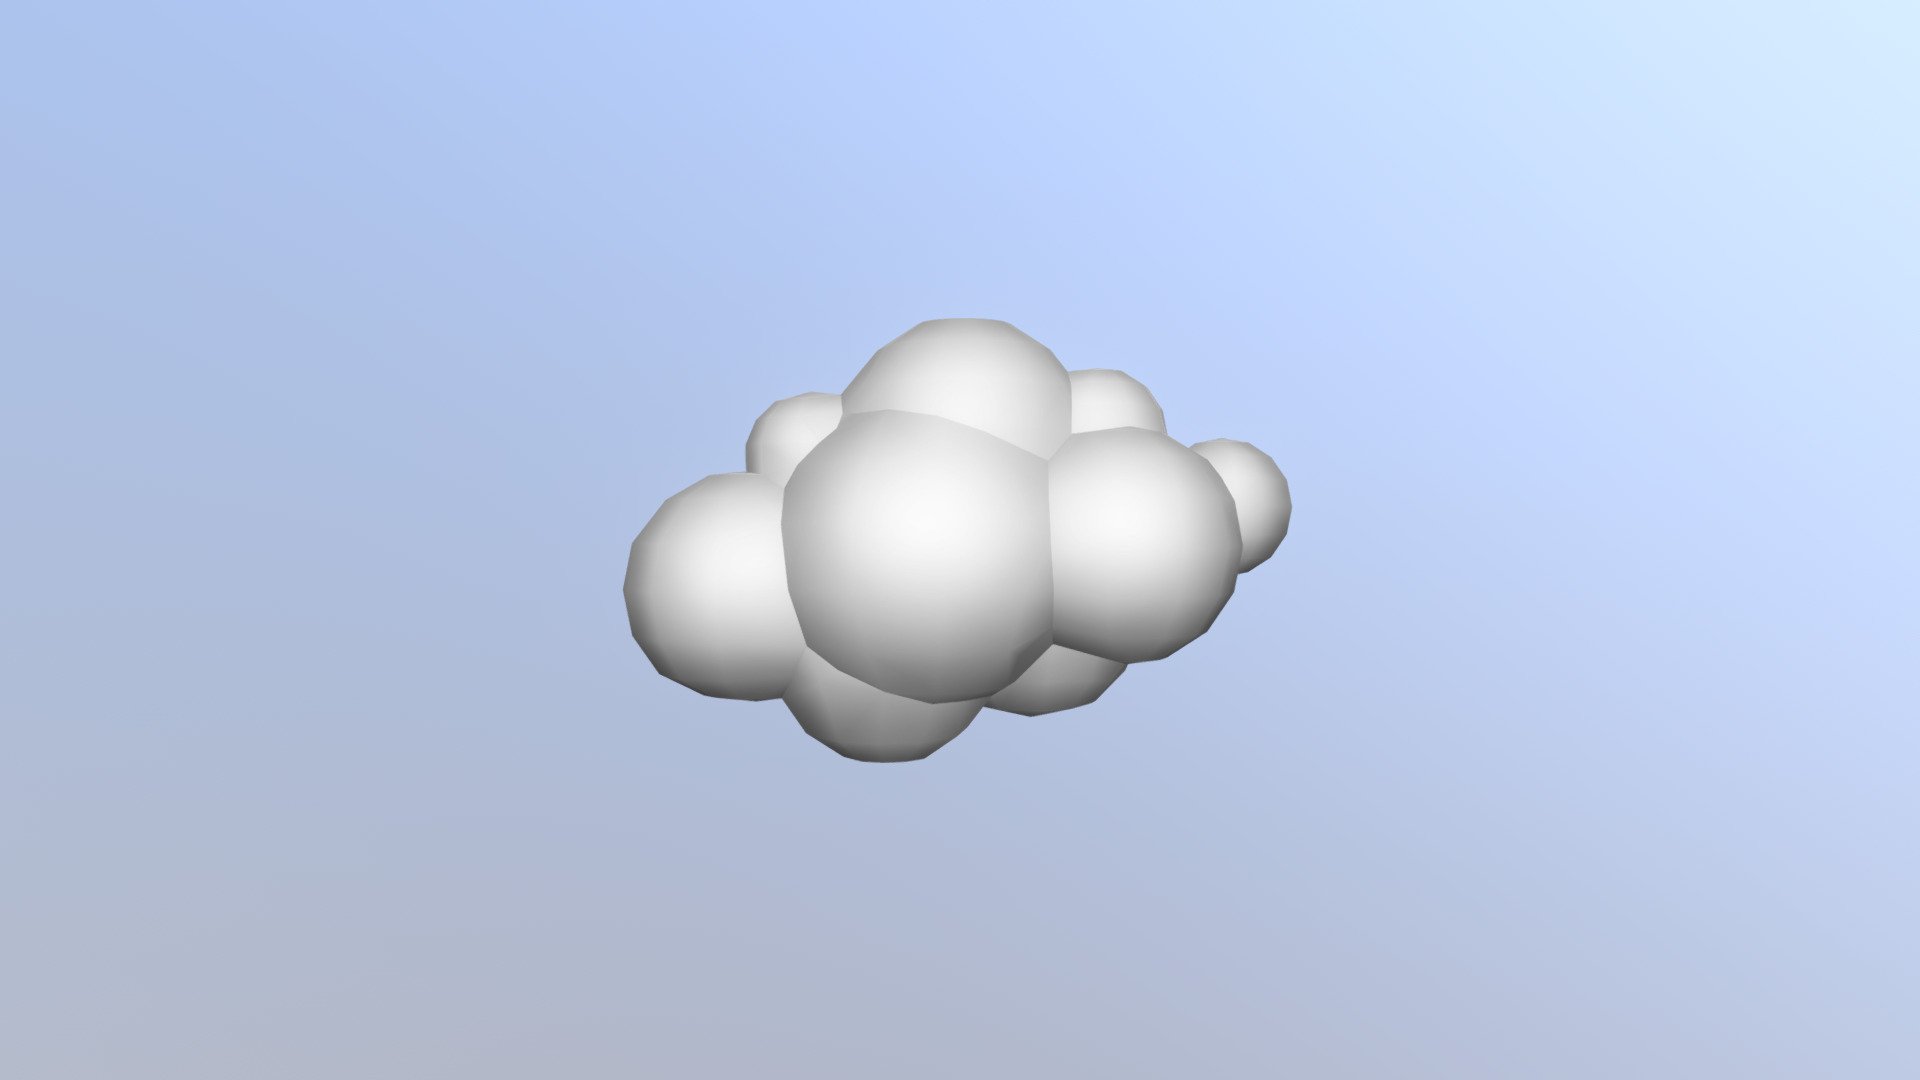 3d animation moving clouds website